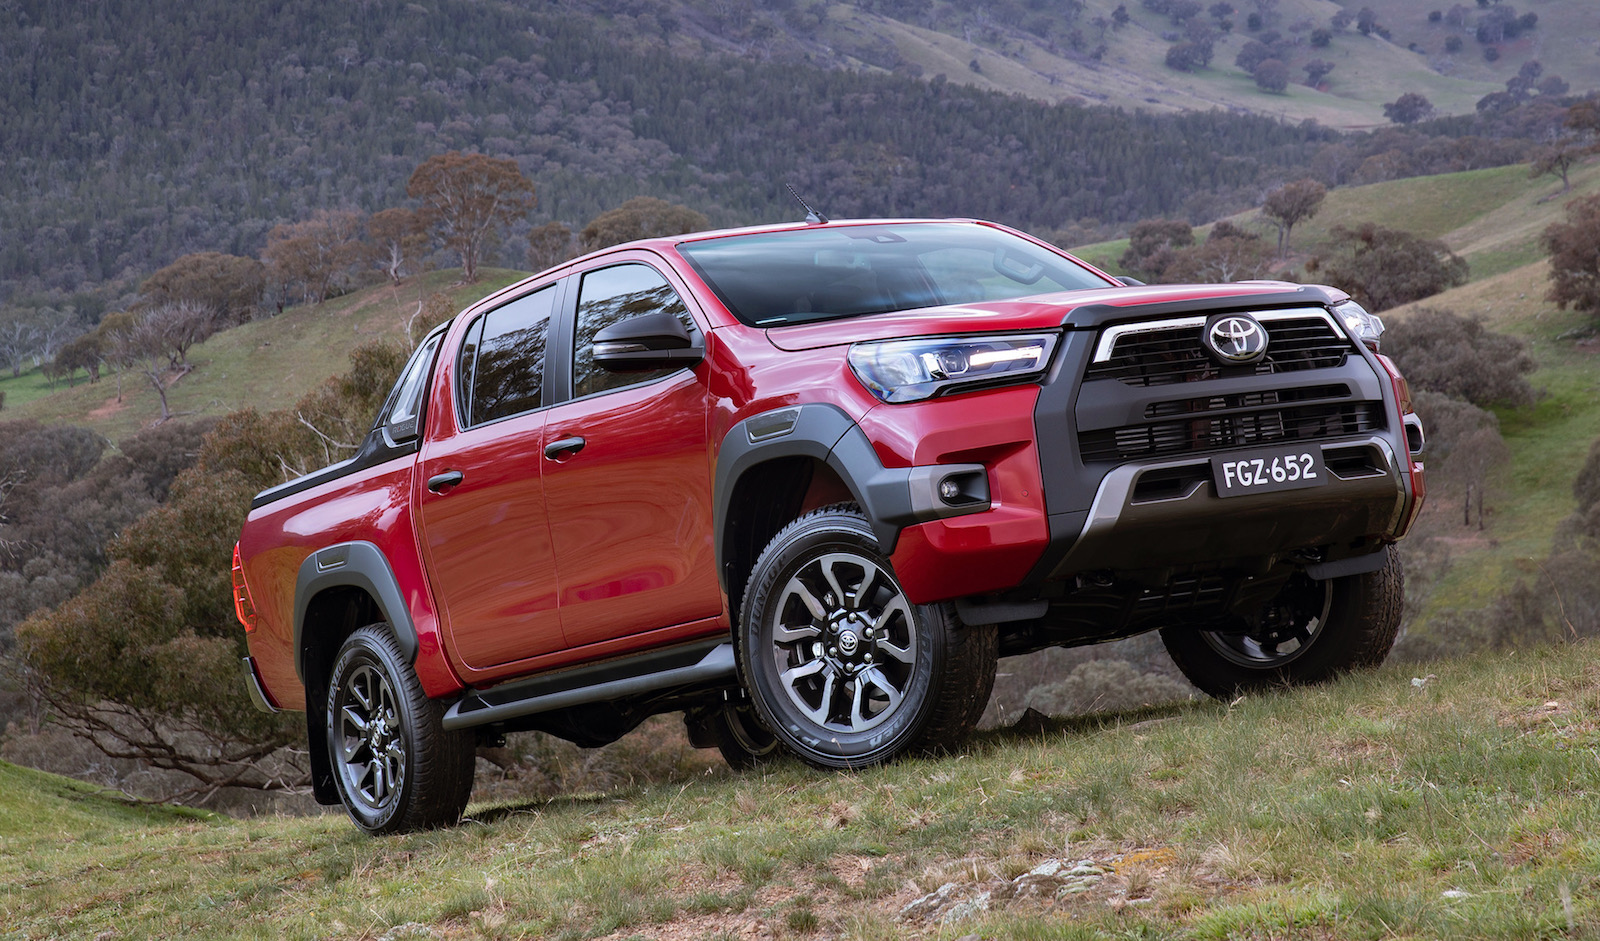 2021 Toyota HiLux: prices and specs confirmed for Australia